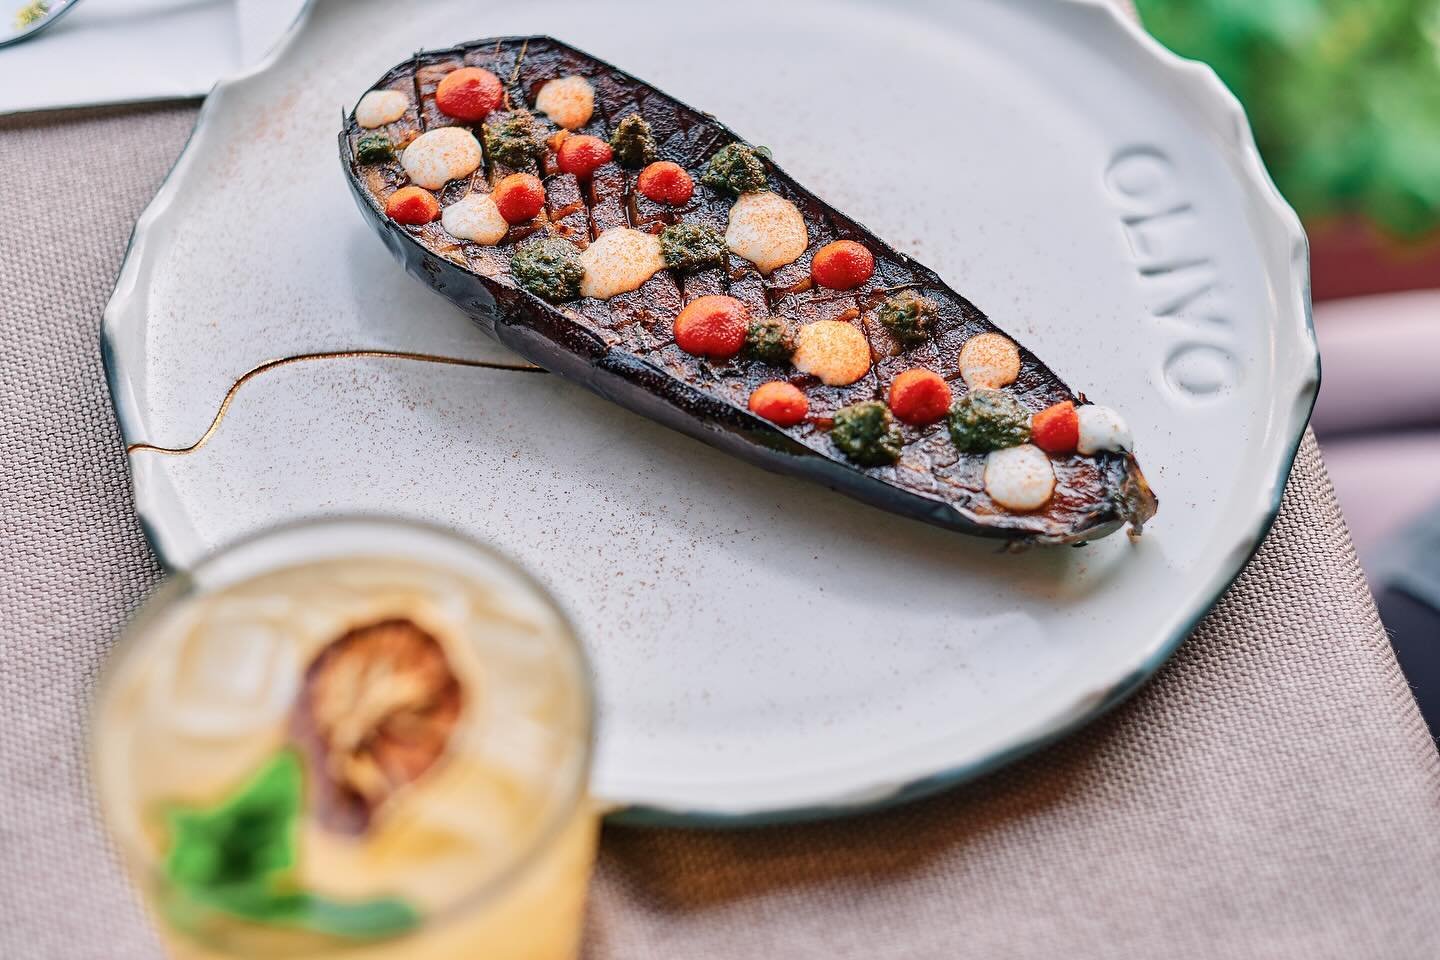 While searching for the summer taste in our menu, turn your attention towards this combination of a delicious glazed eggplant and the classic Italian mix between parmesan, garlic, tomato sauce, mozzarella di buffala and fresh basil. 

🌳 This dish fe